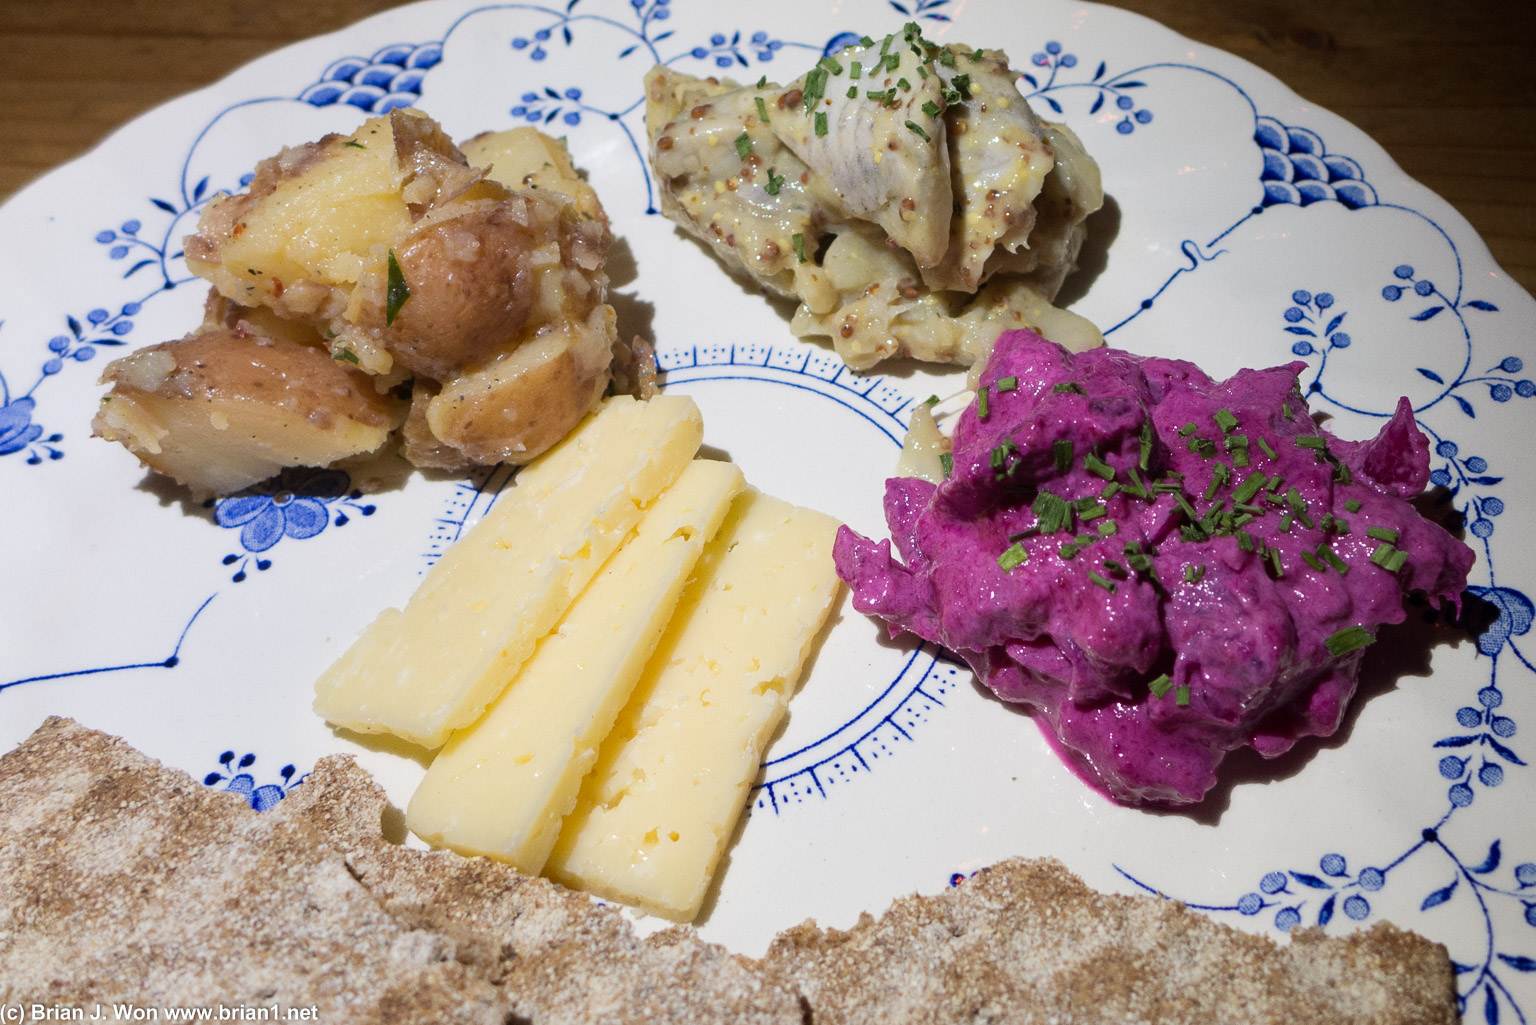 Herring plate. White herring was good, potatoes were also good, the pink herring was a ittle weird.